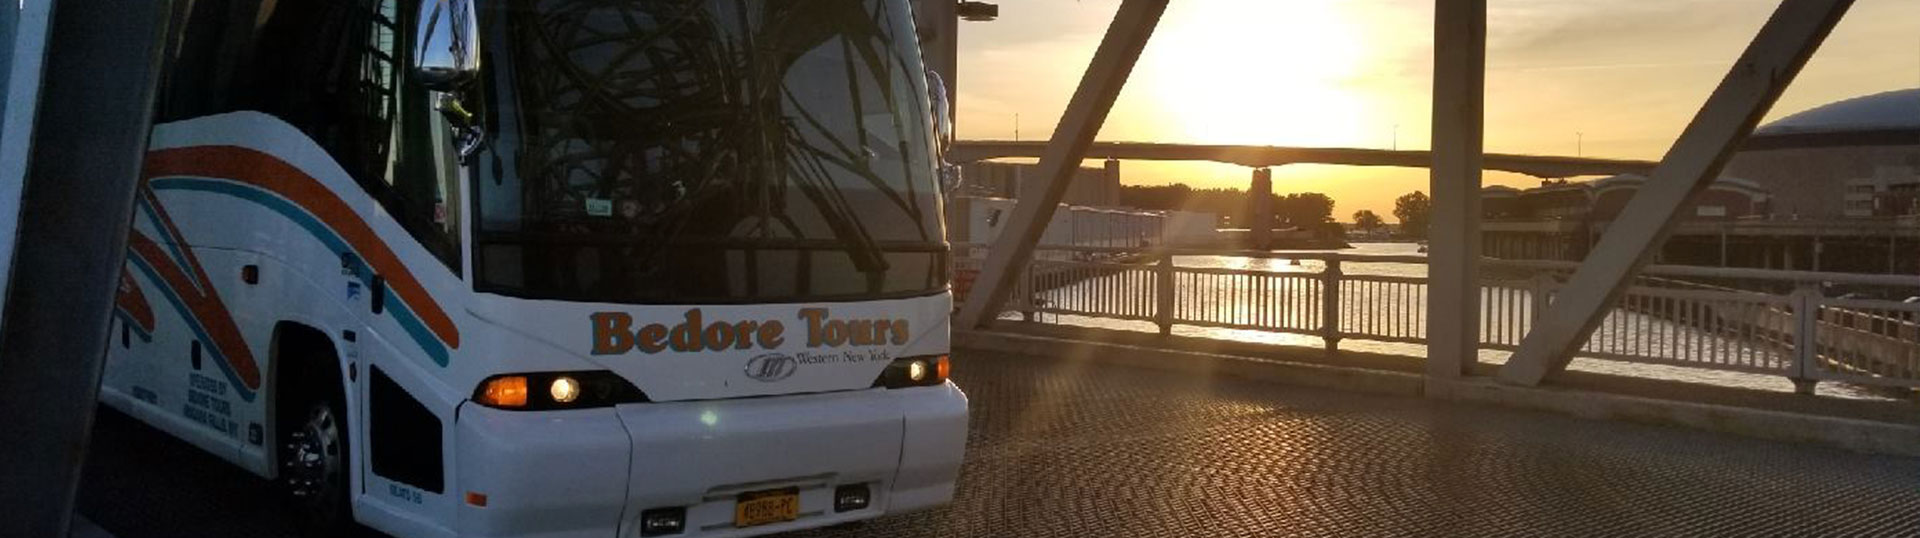 bedore tours services